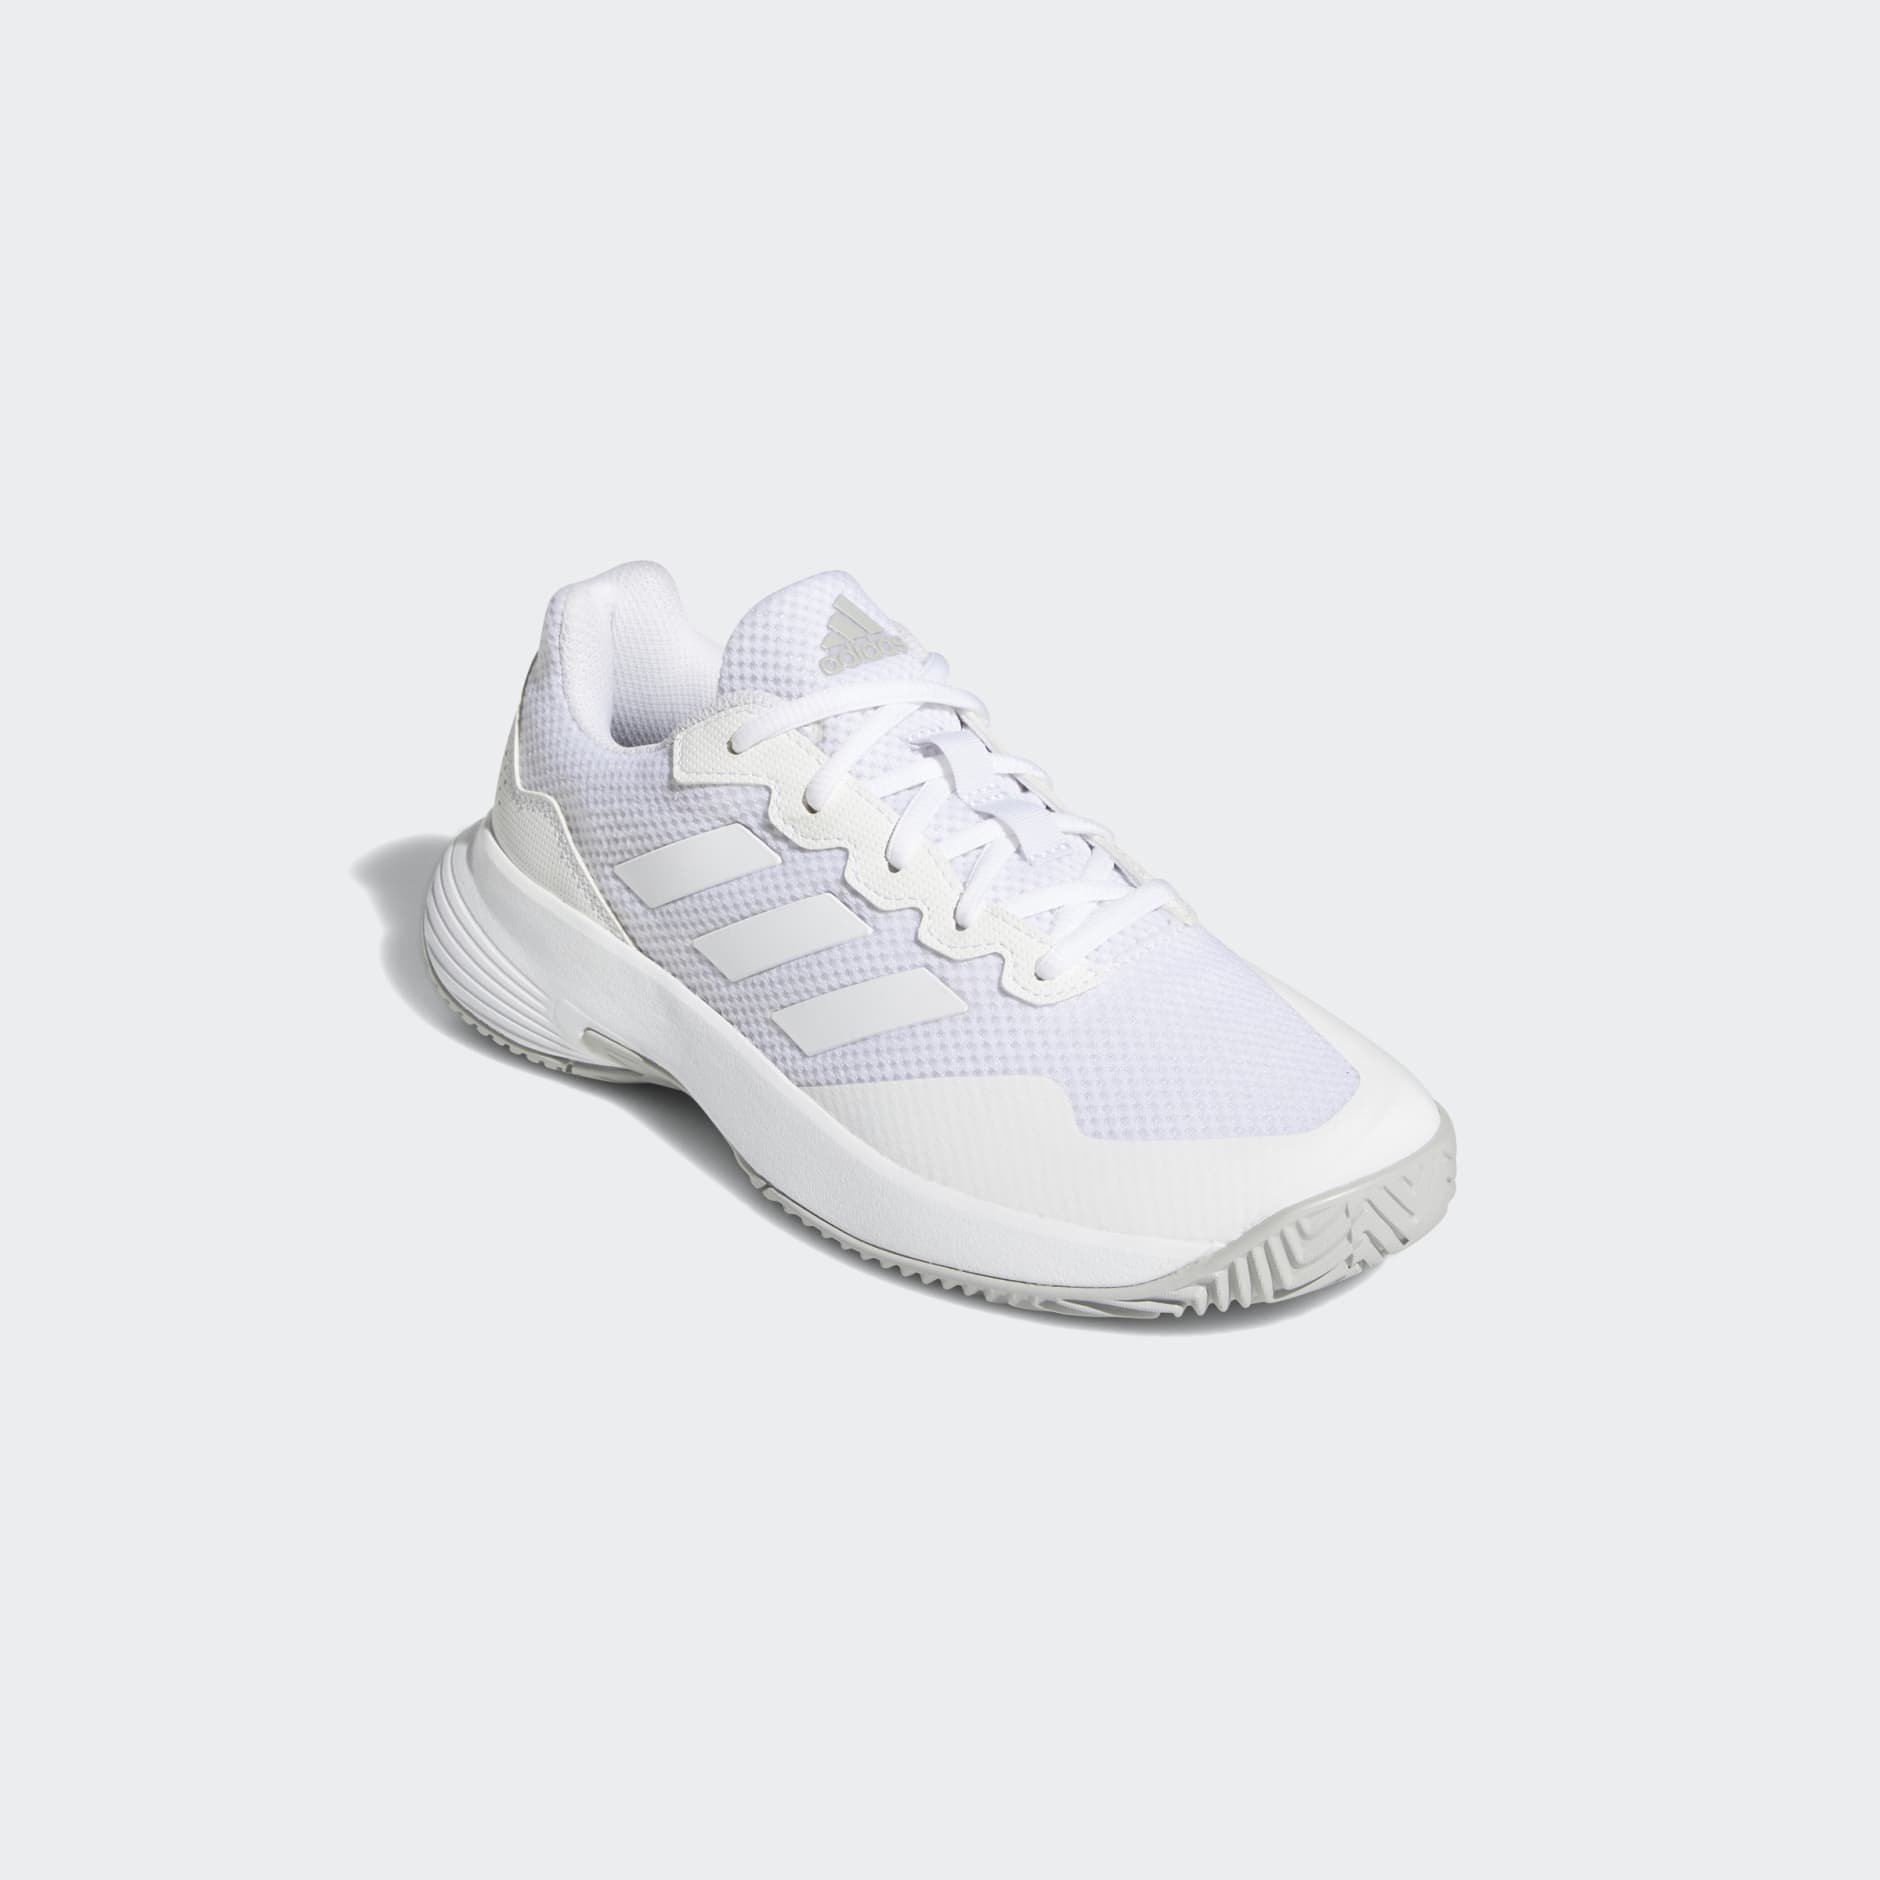 Shoes - Gamecourt 2.0 Tennis Shoes - White | adidas South Africa